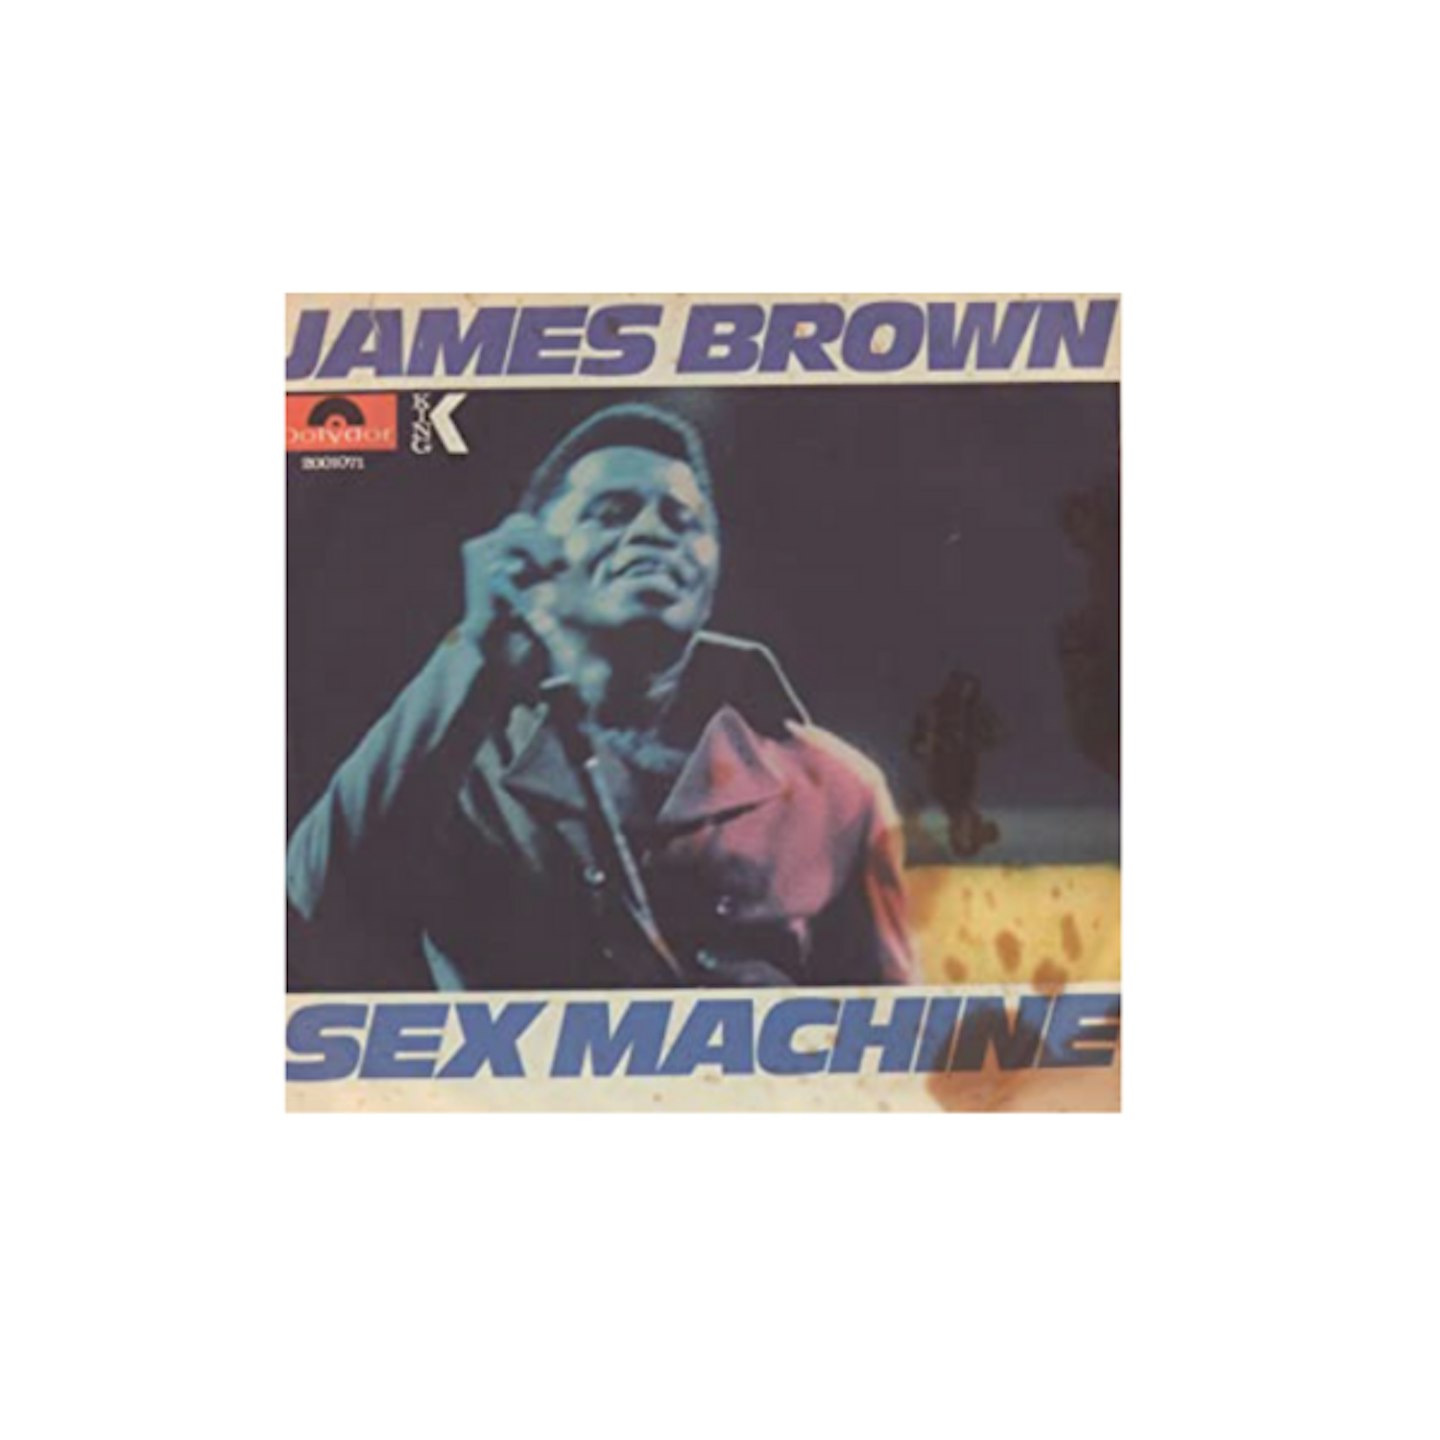 James Brown - Get Up I Feel Like Being A) Sex Machine